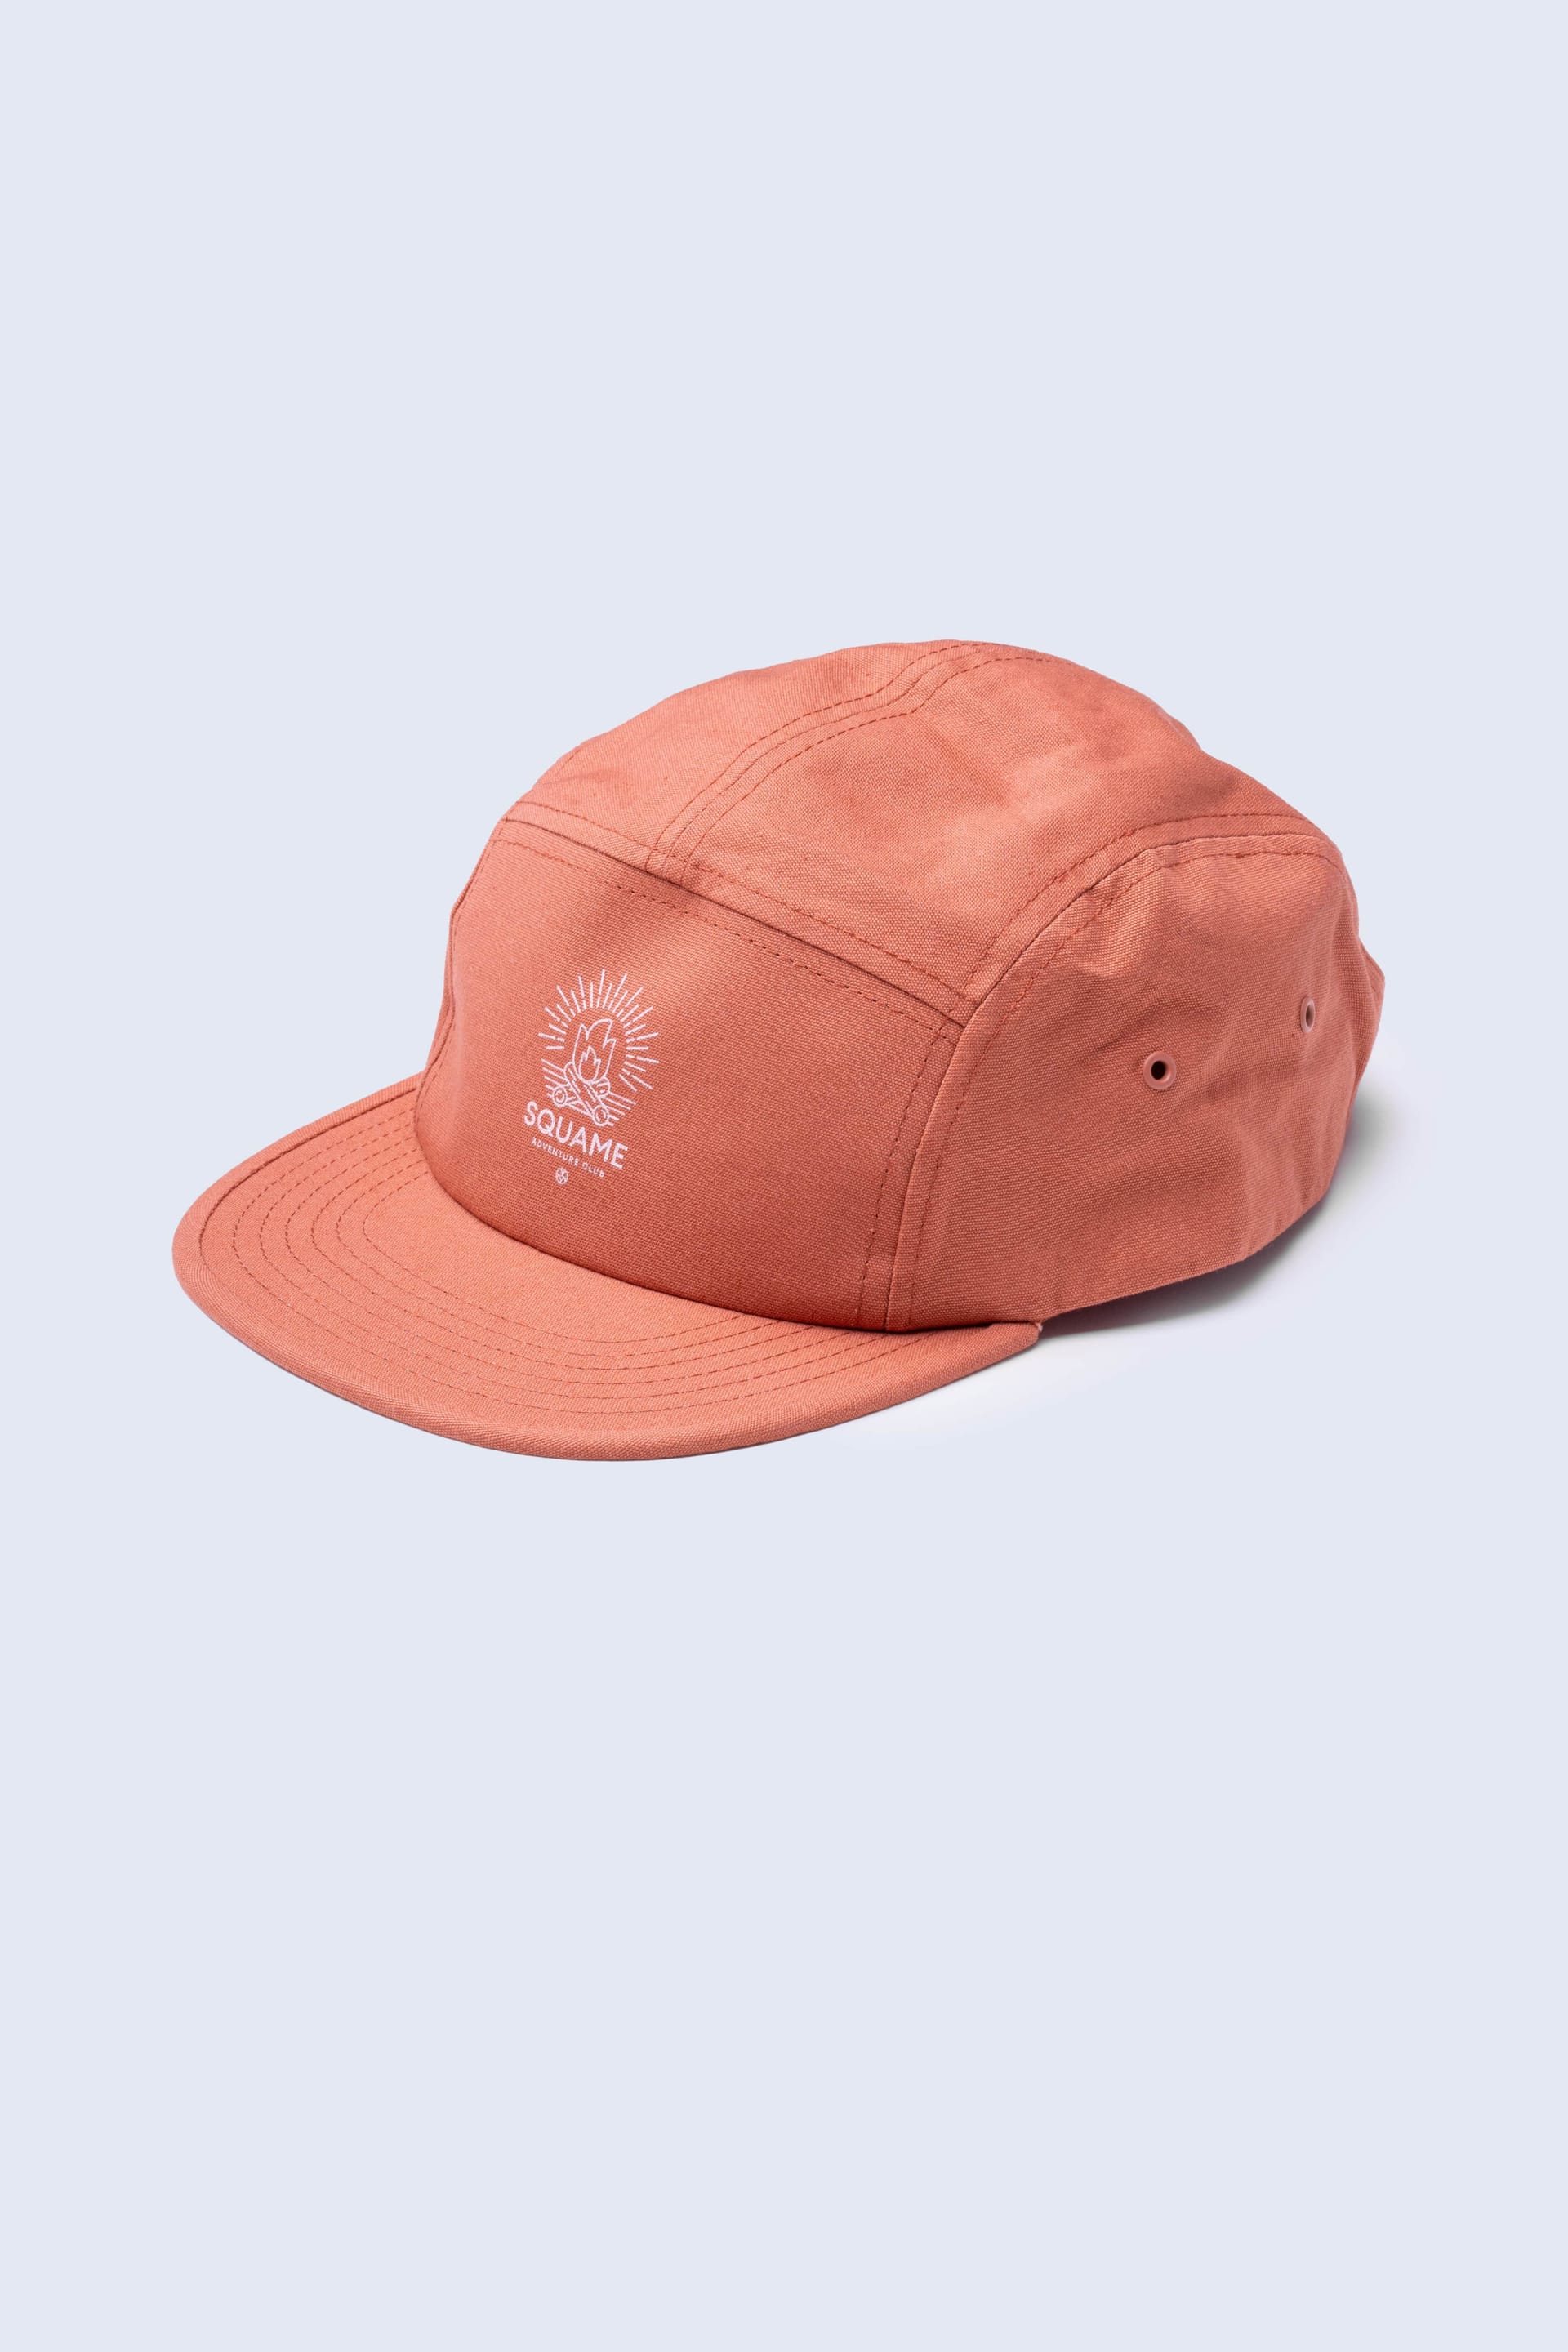 Adventure Club Five Panel - Coral Red